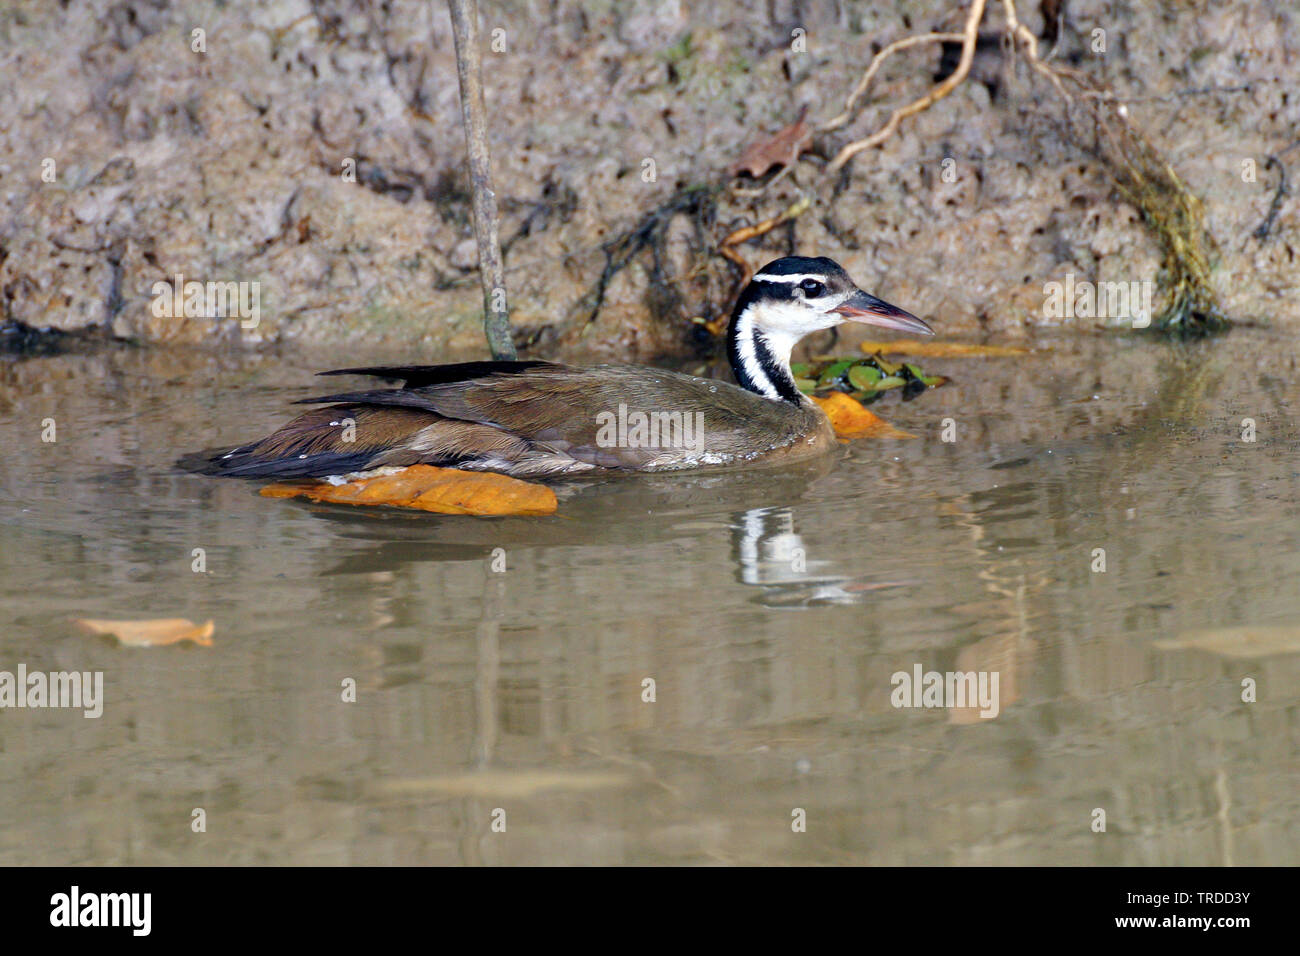 American finfoot (Heliornis fulica), South America Stock Photo